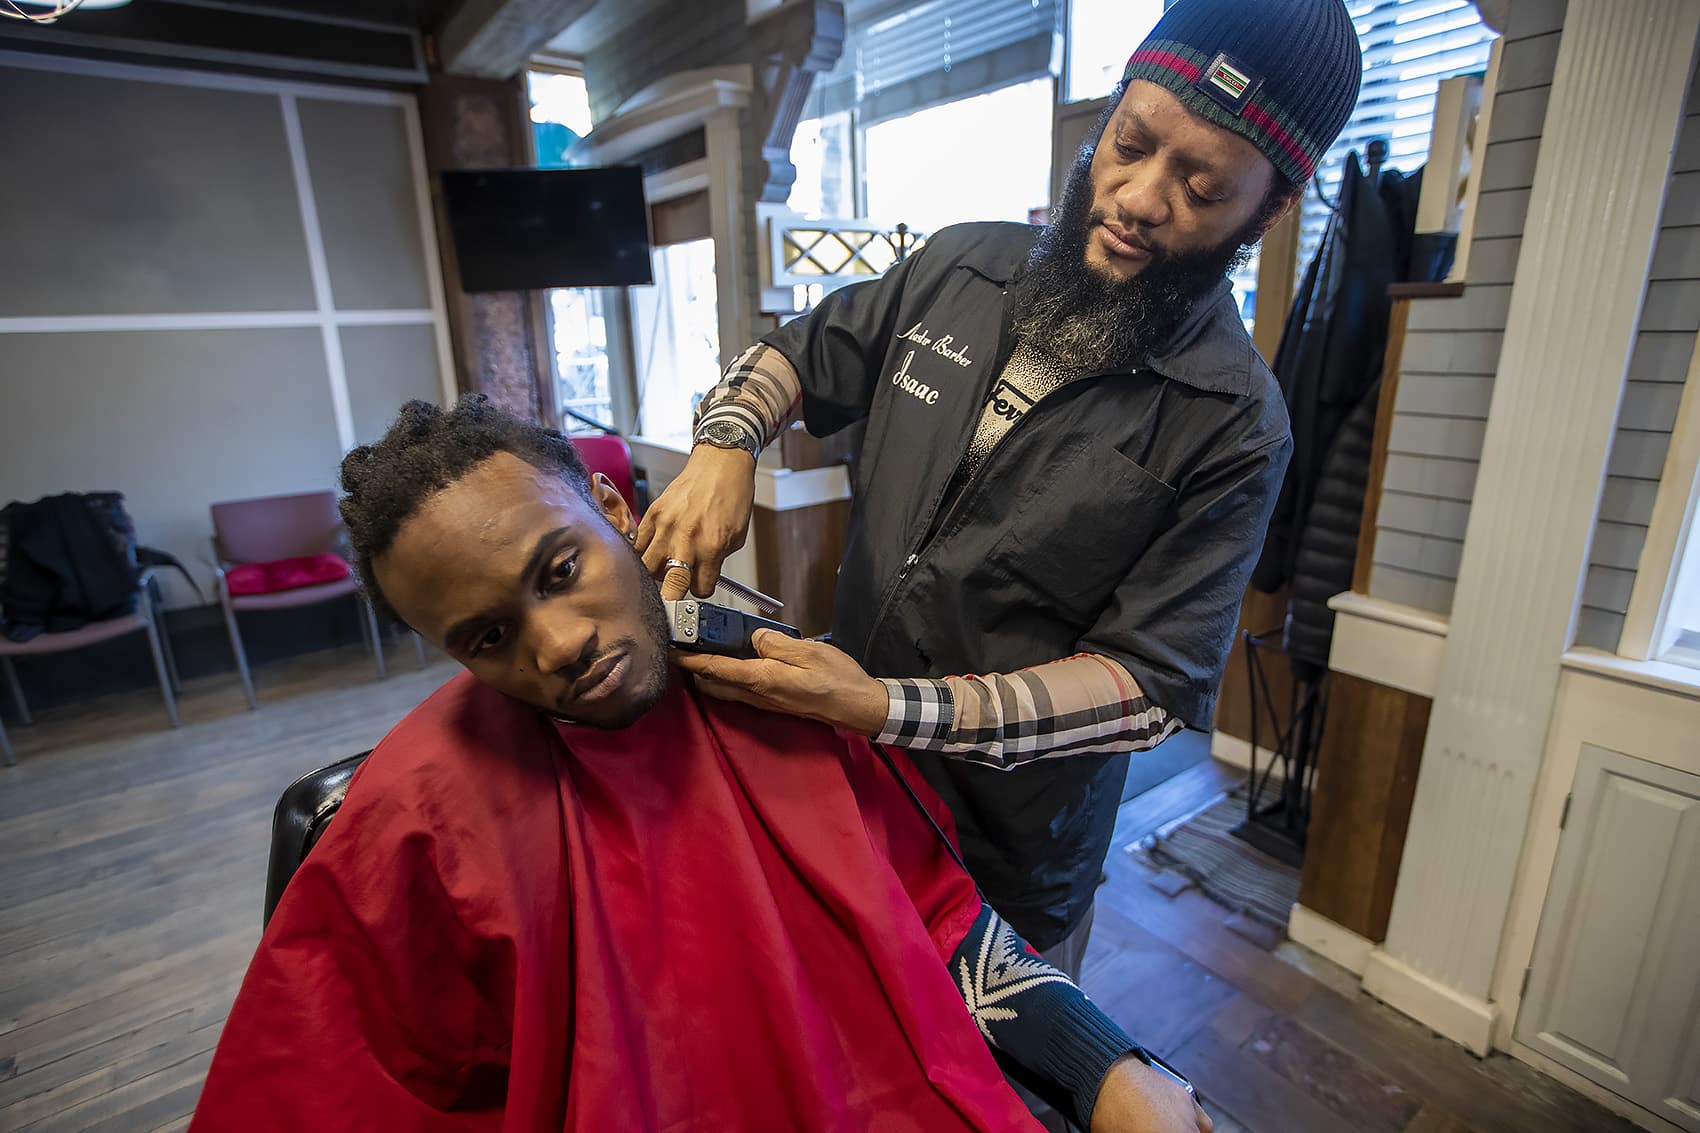 Men's Mental Health: Building Connections at the Barbershop